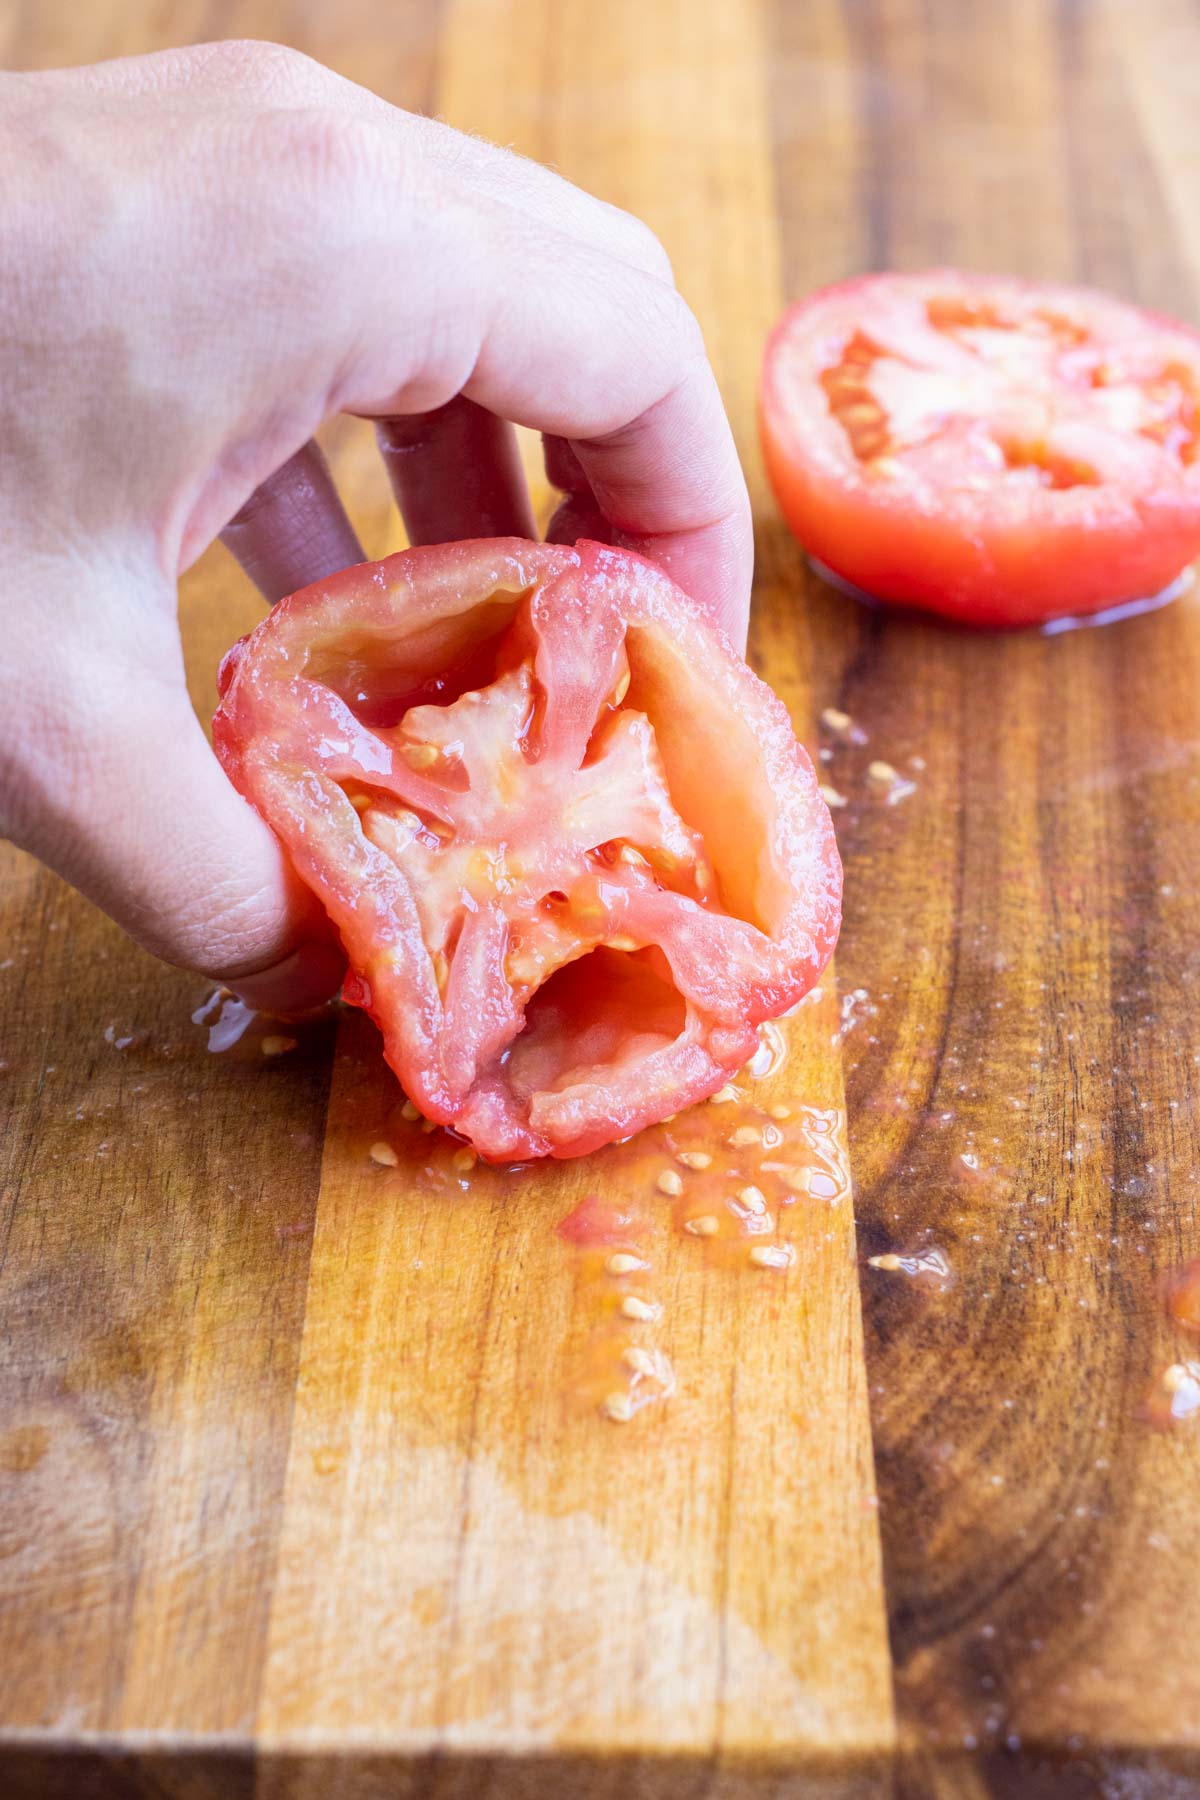 You can remove the seeds of a tomato by squeezing them out.